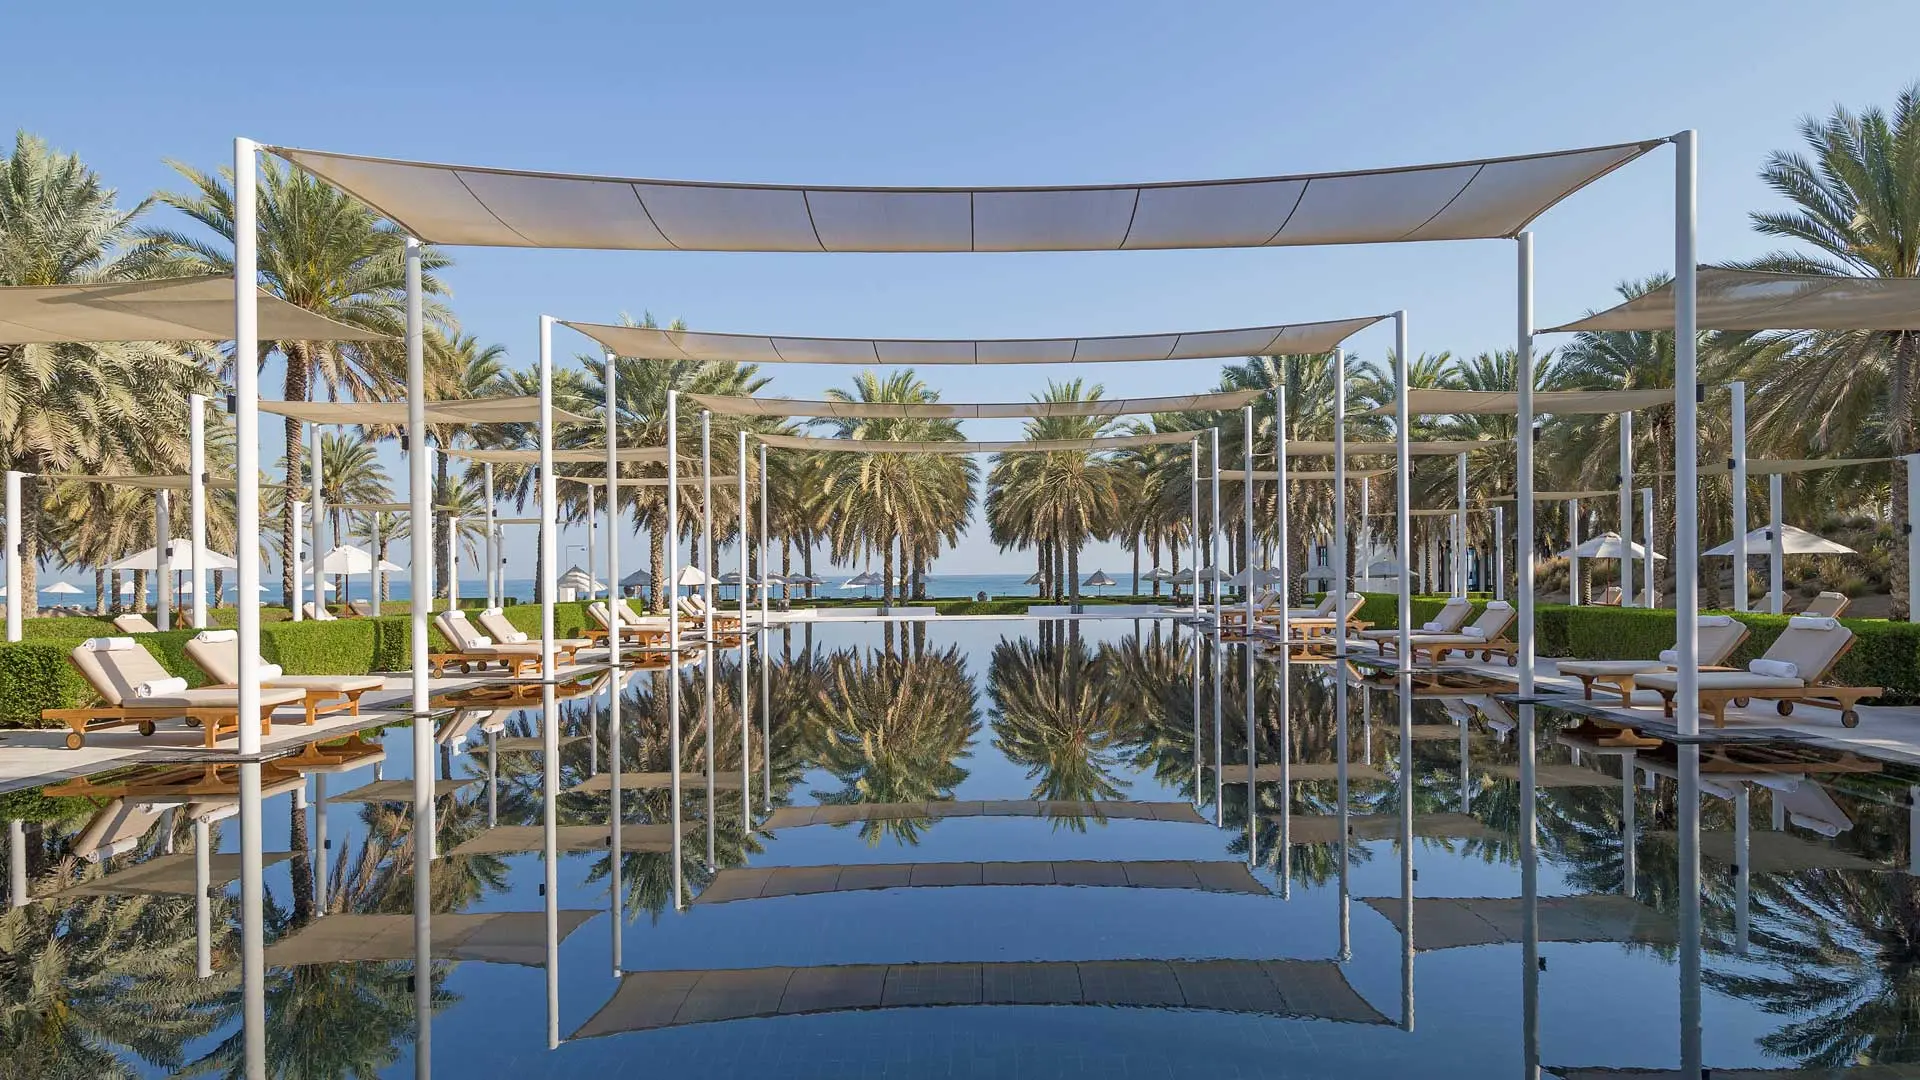 Hotel review Service & Facilities' - The Chedi Muscat - 2